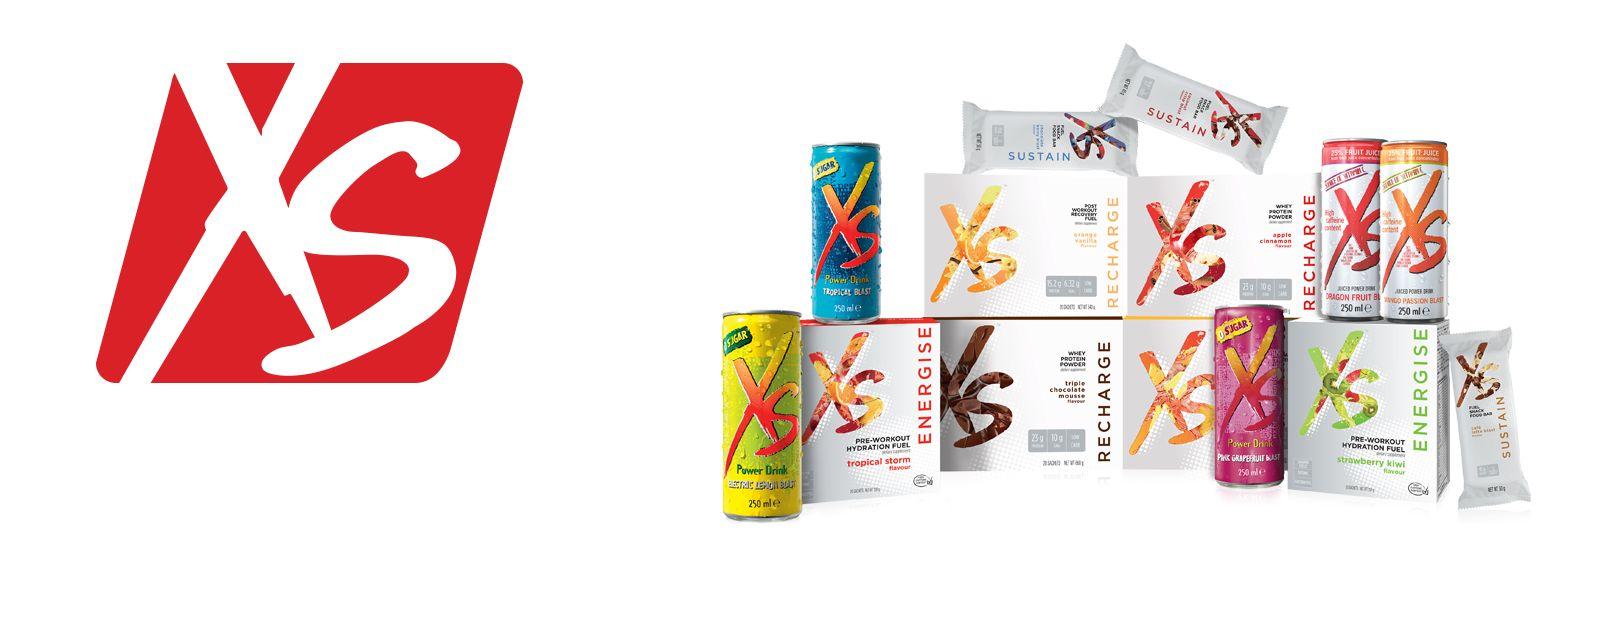 XS Logo - XS | Amway of South Africa